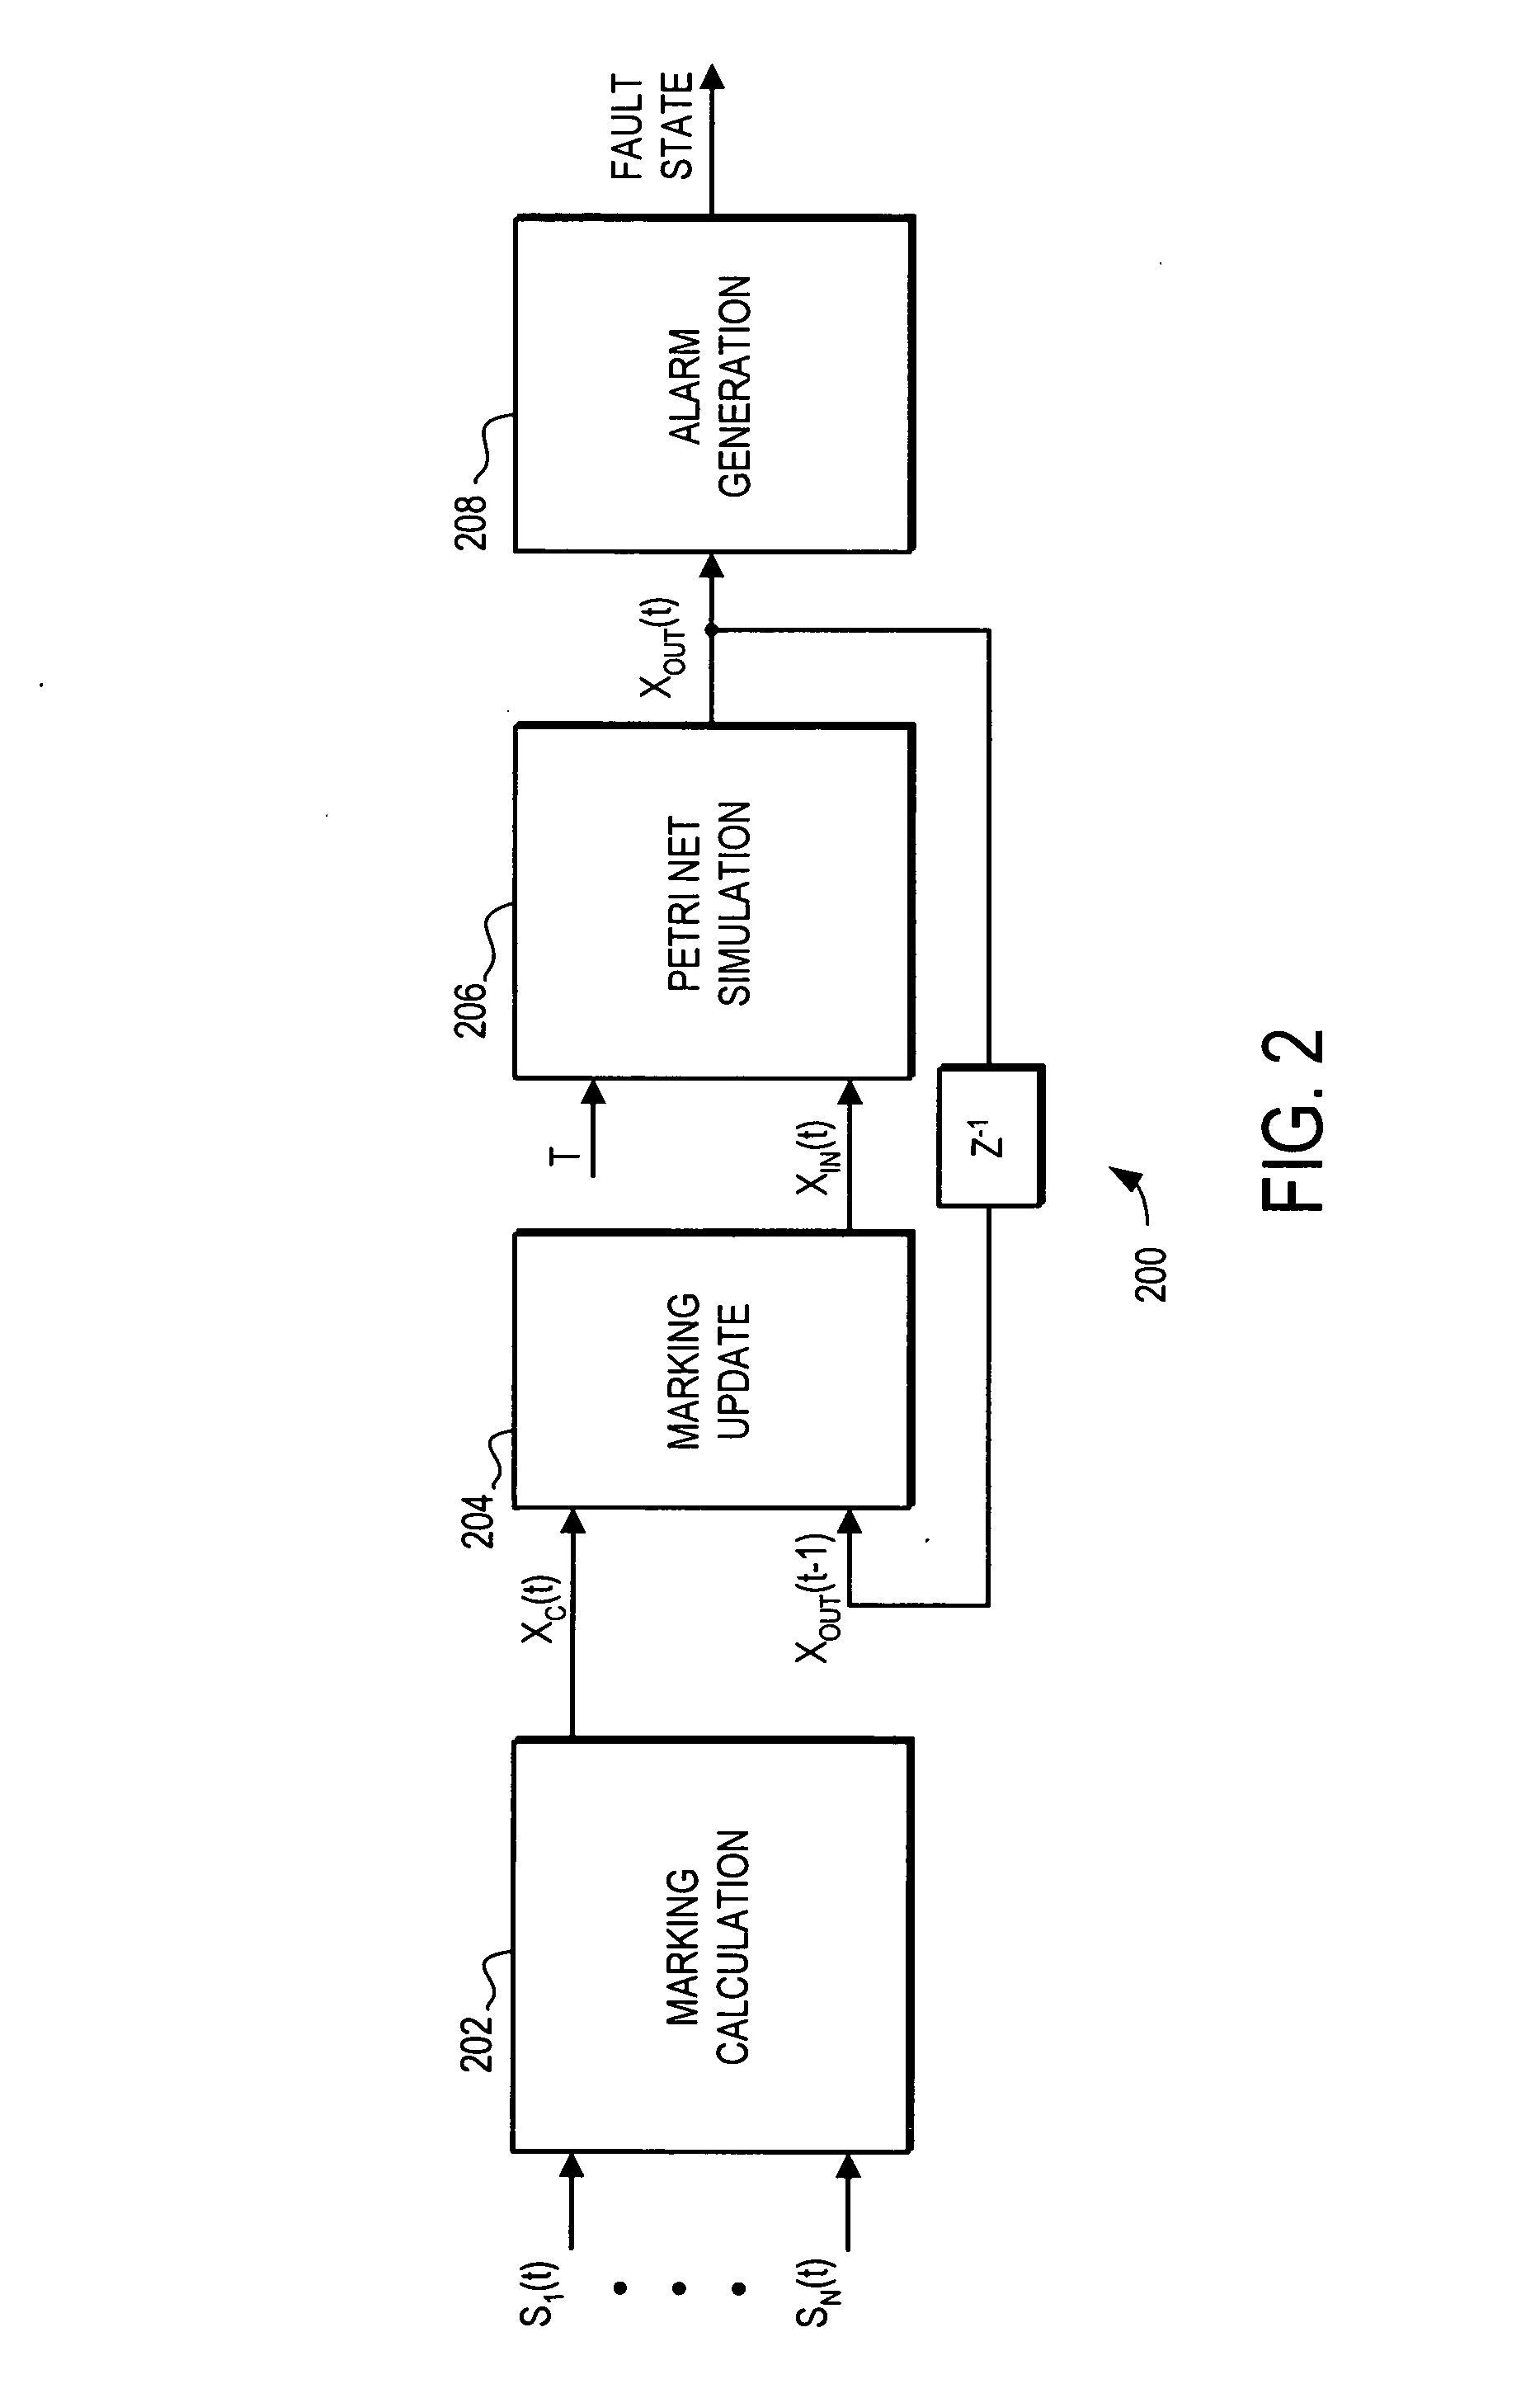 System and method for turbine engine fault detection using discrete event system modeling